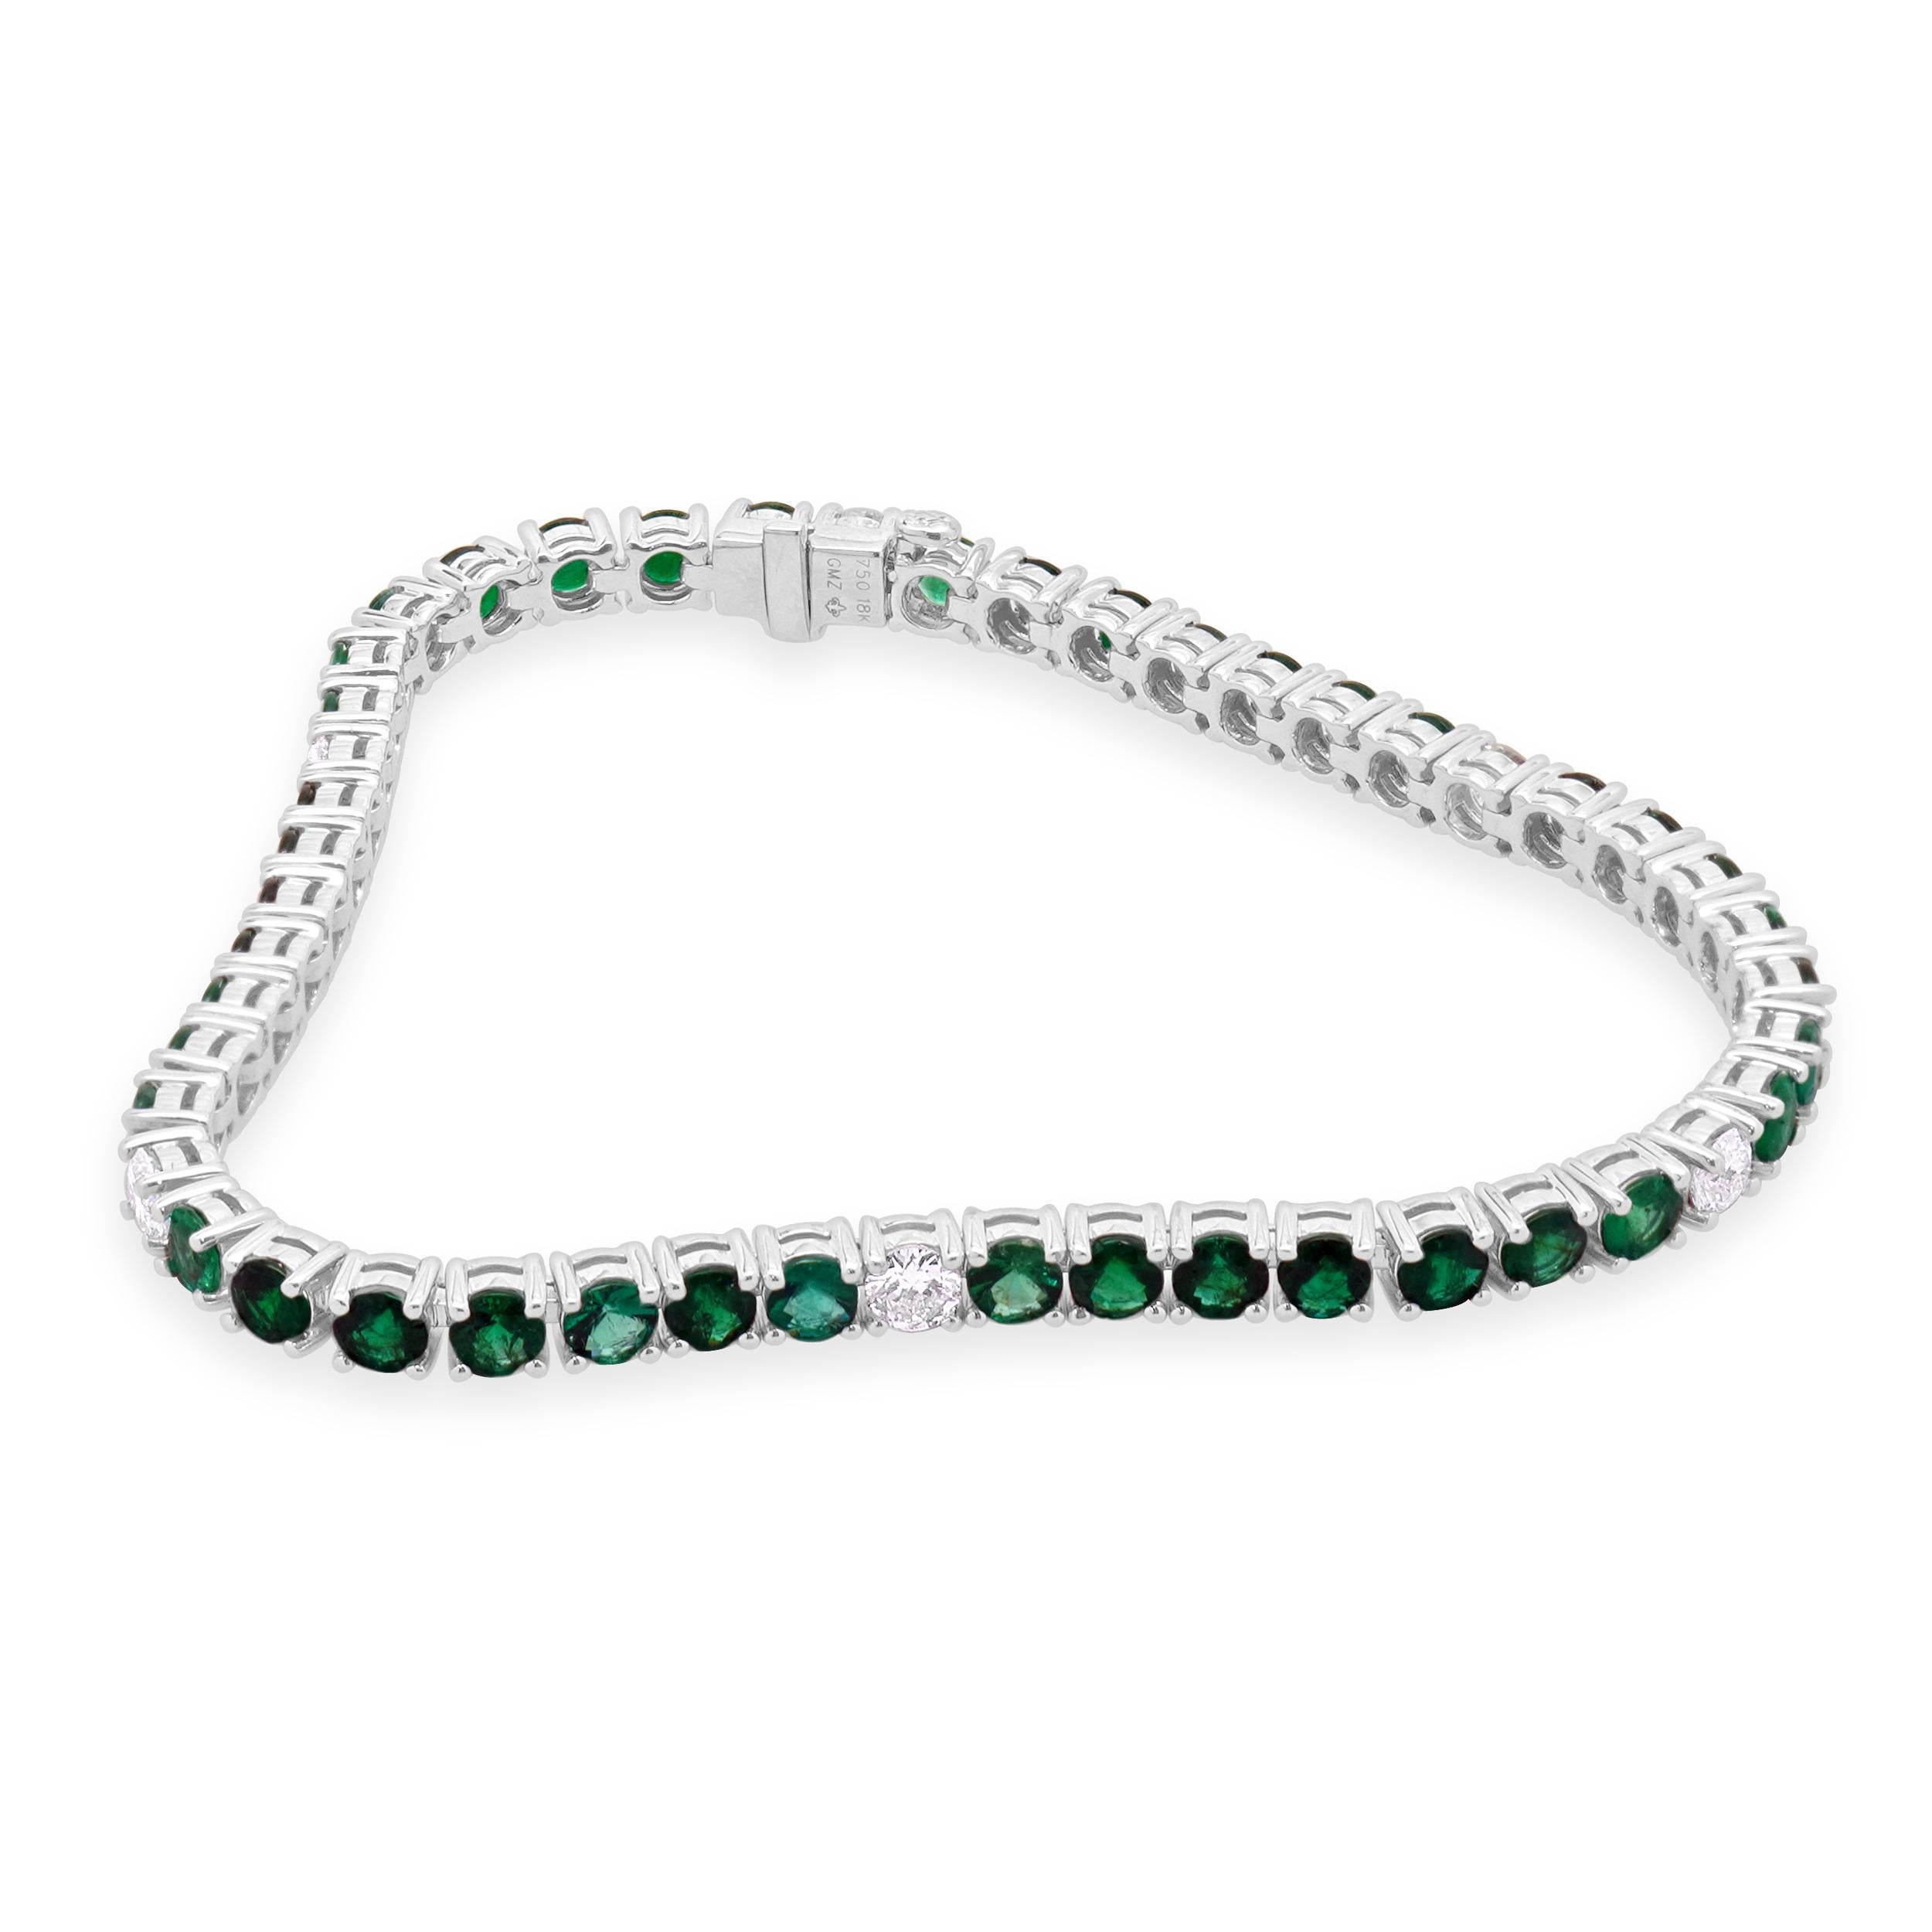 Designer: custom
Material: 14K white gold
Diamond: round brilliant cut= 0.95cttw
Color: G
Clarity: VS-SI1
Emerald: round cut = 5.38cttw
Weight: 12.84 grams
Dimensions: bracelet will fit up to a 7.5-inch wrist
